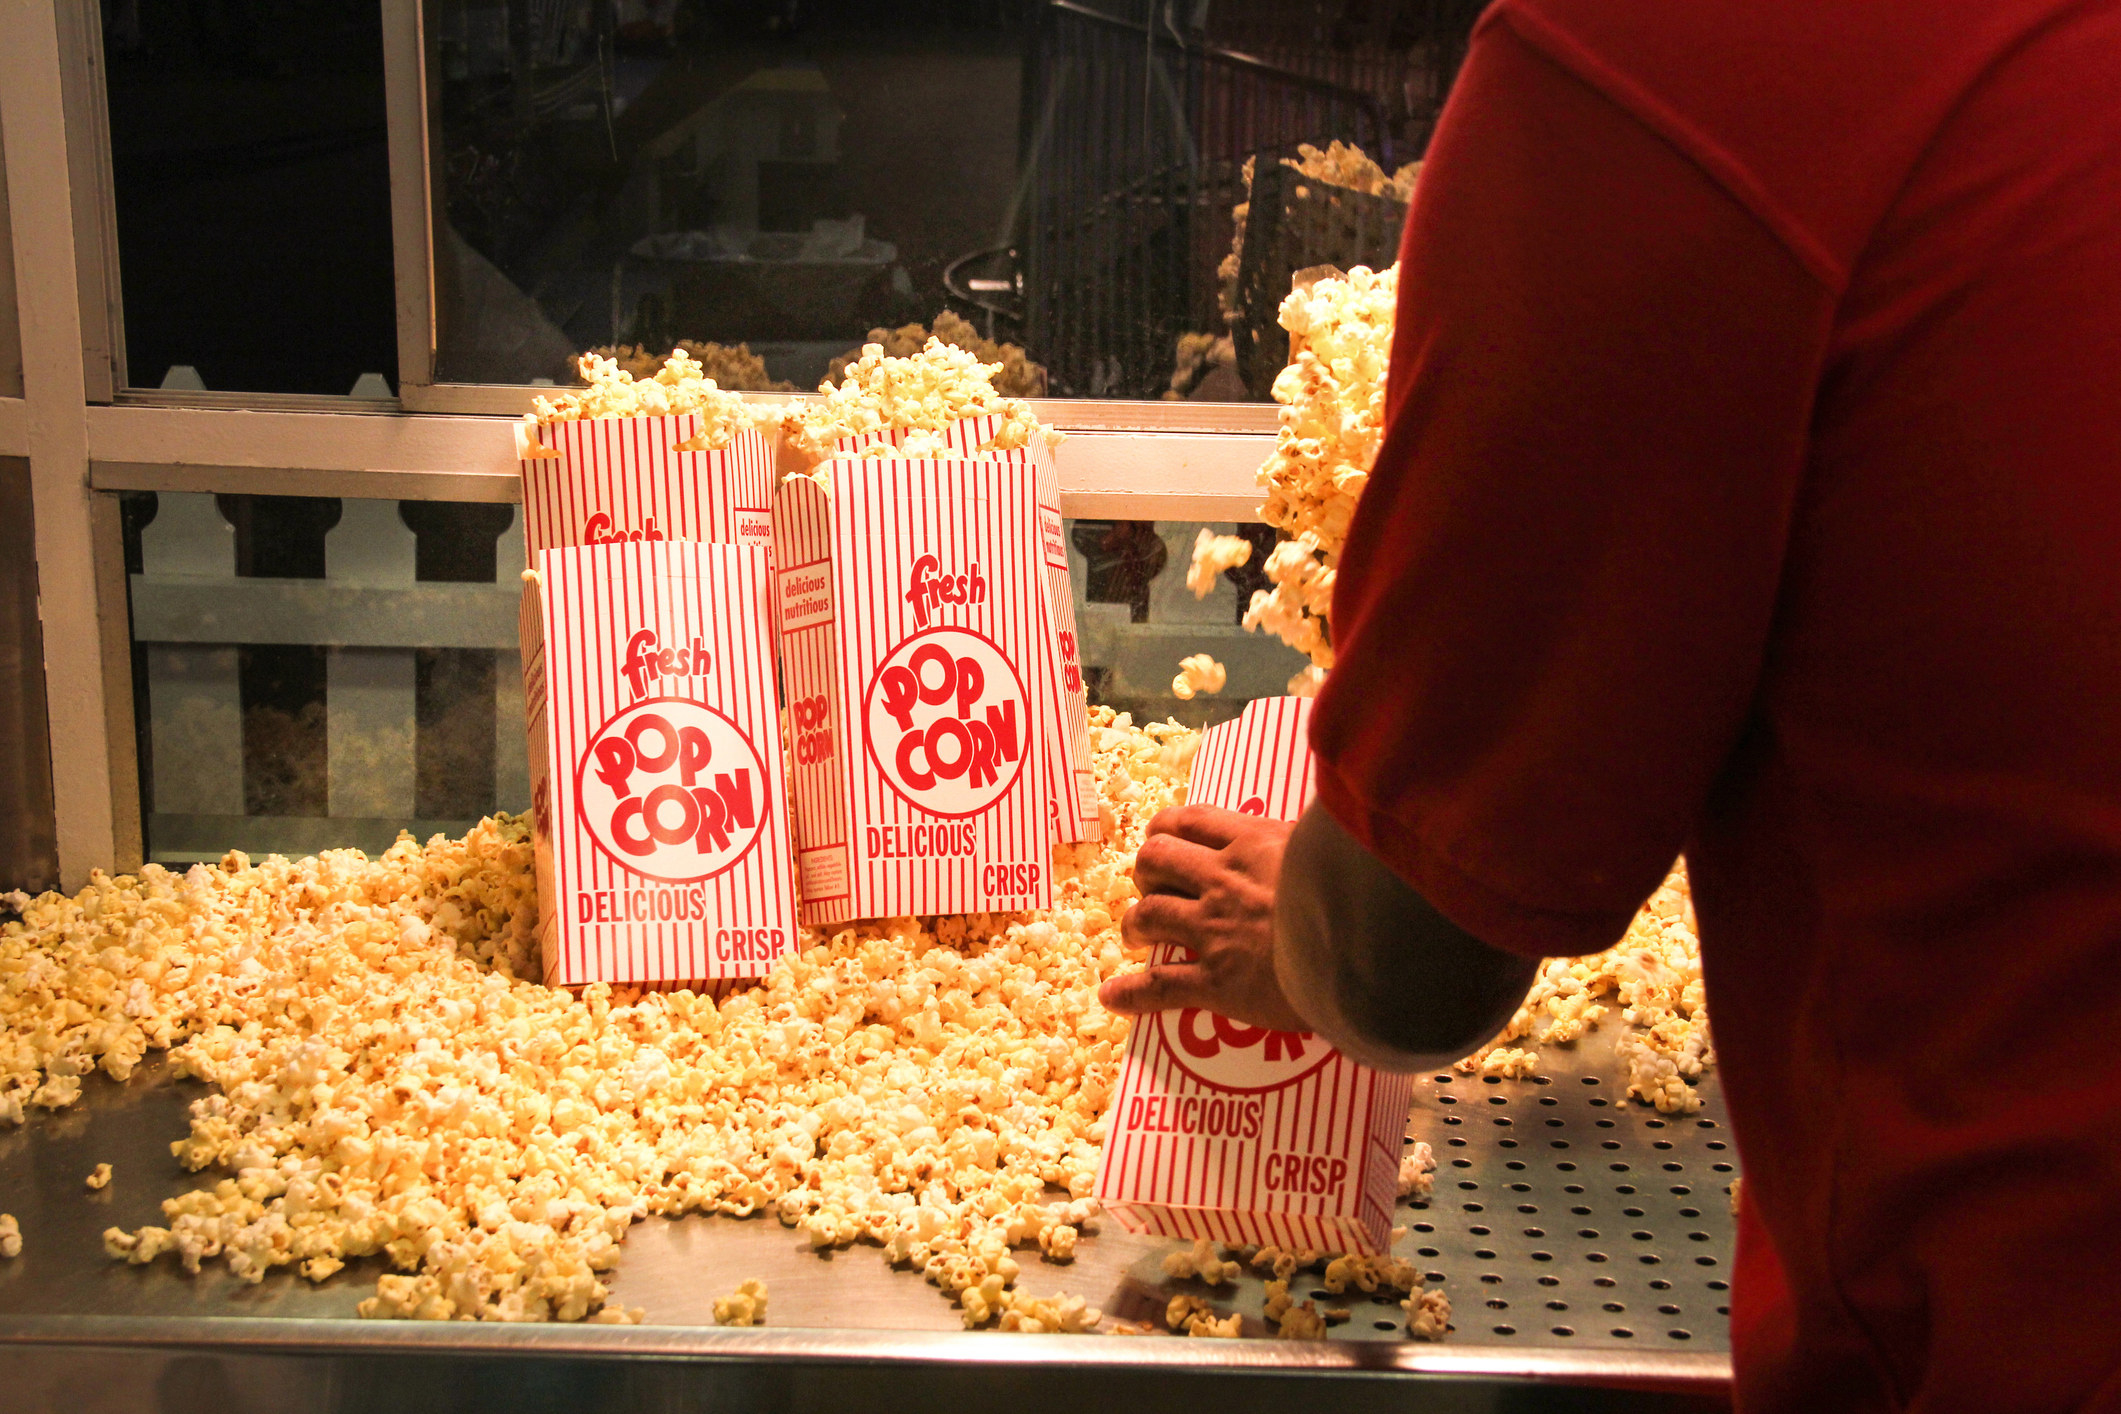 A person filling up bags of popcorn